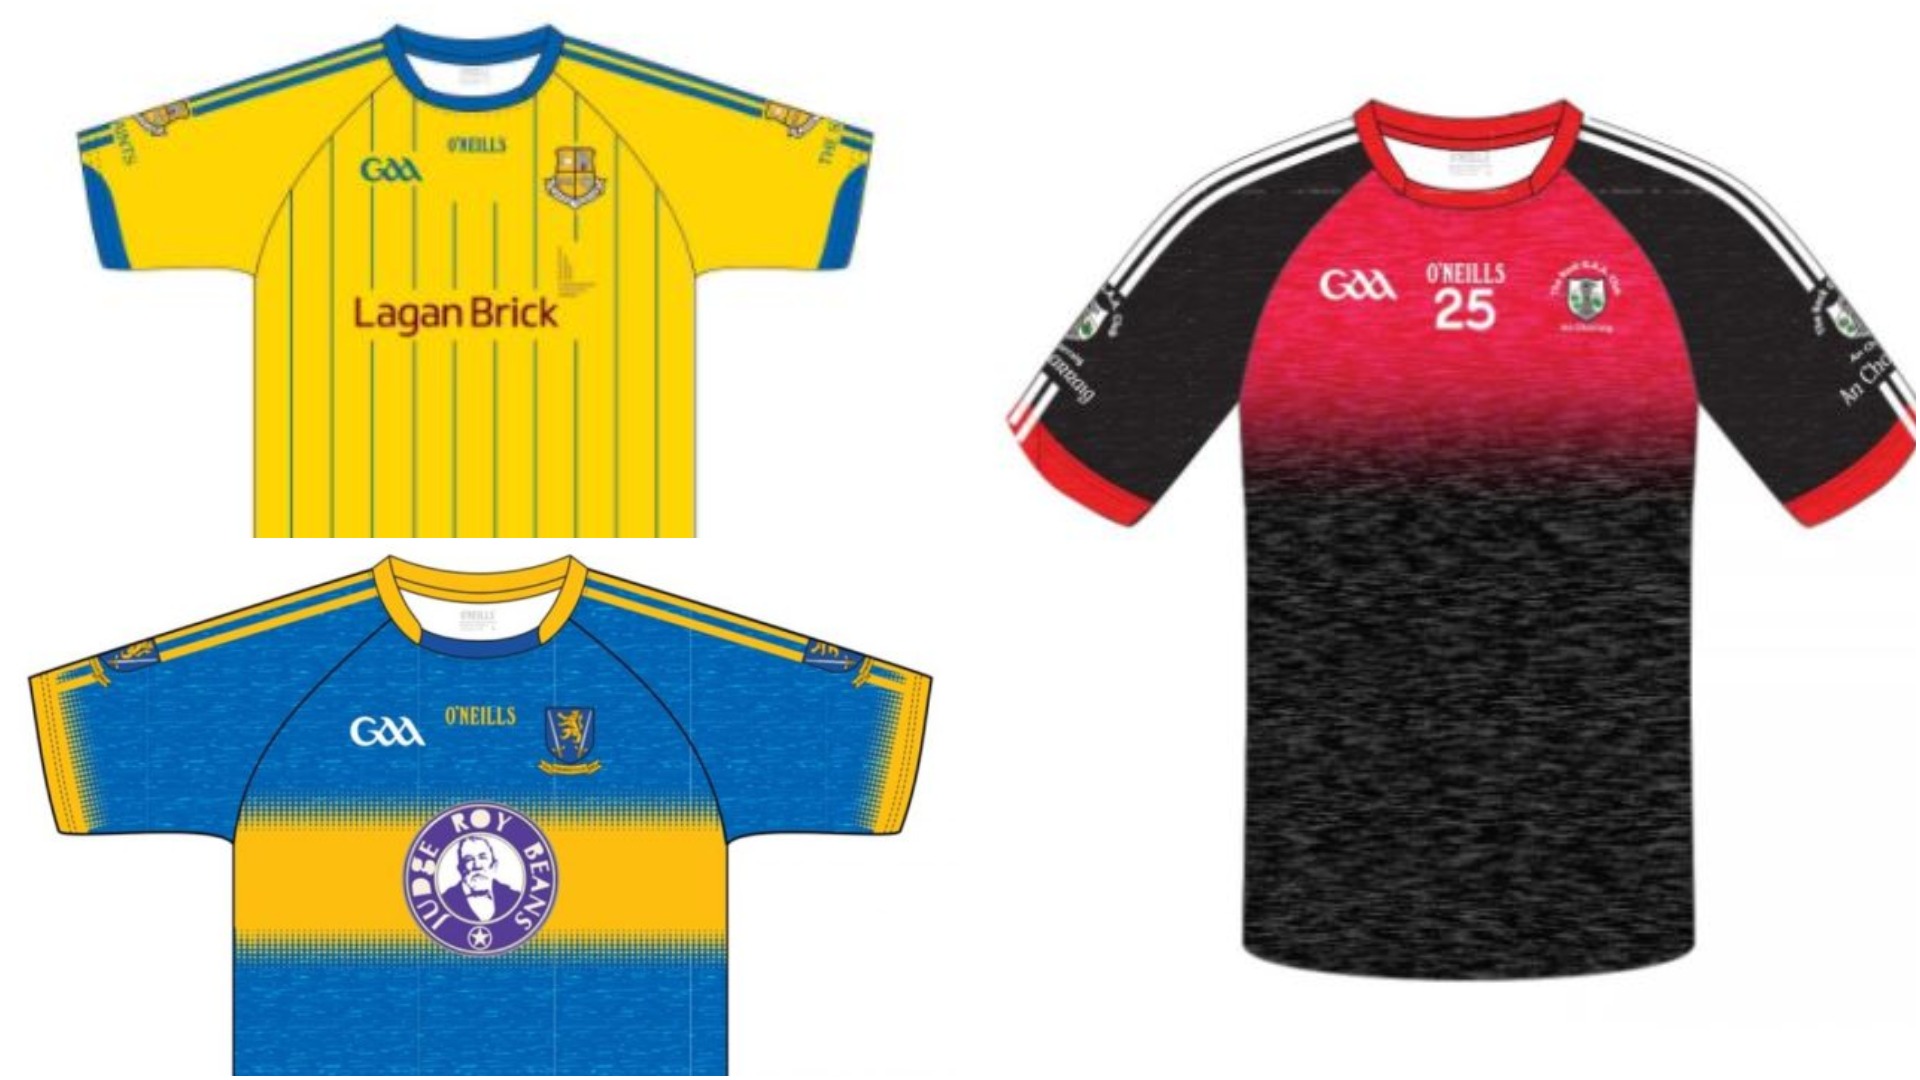 blue and yellow gaa jersey